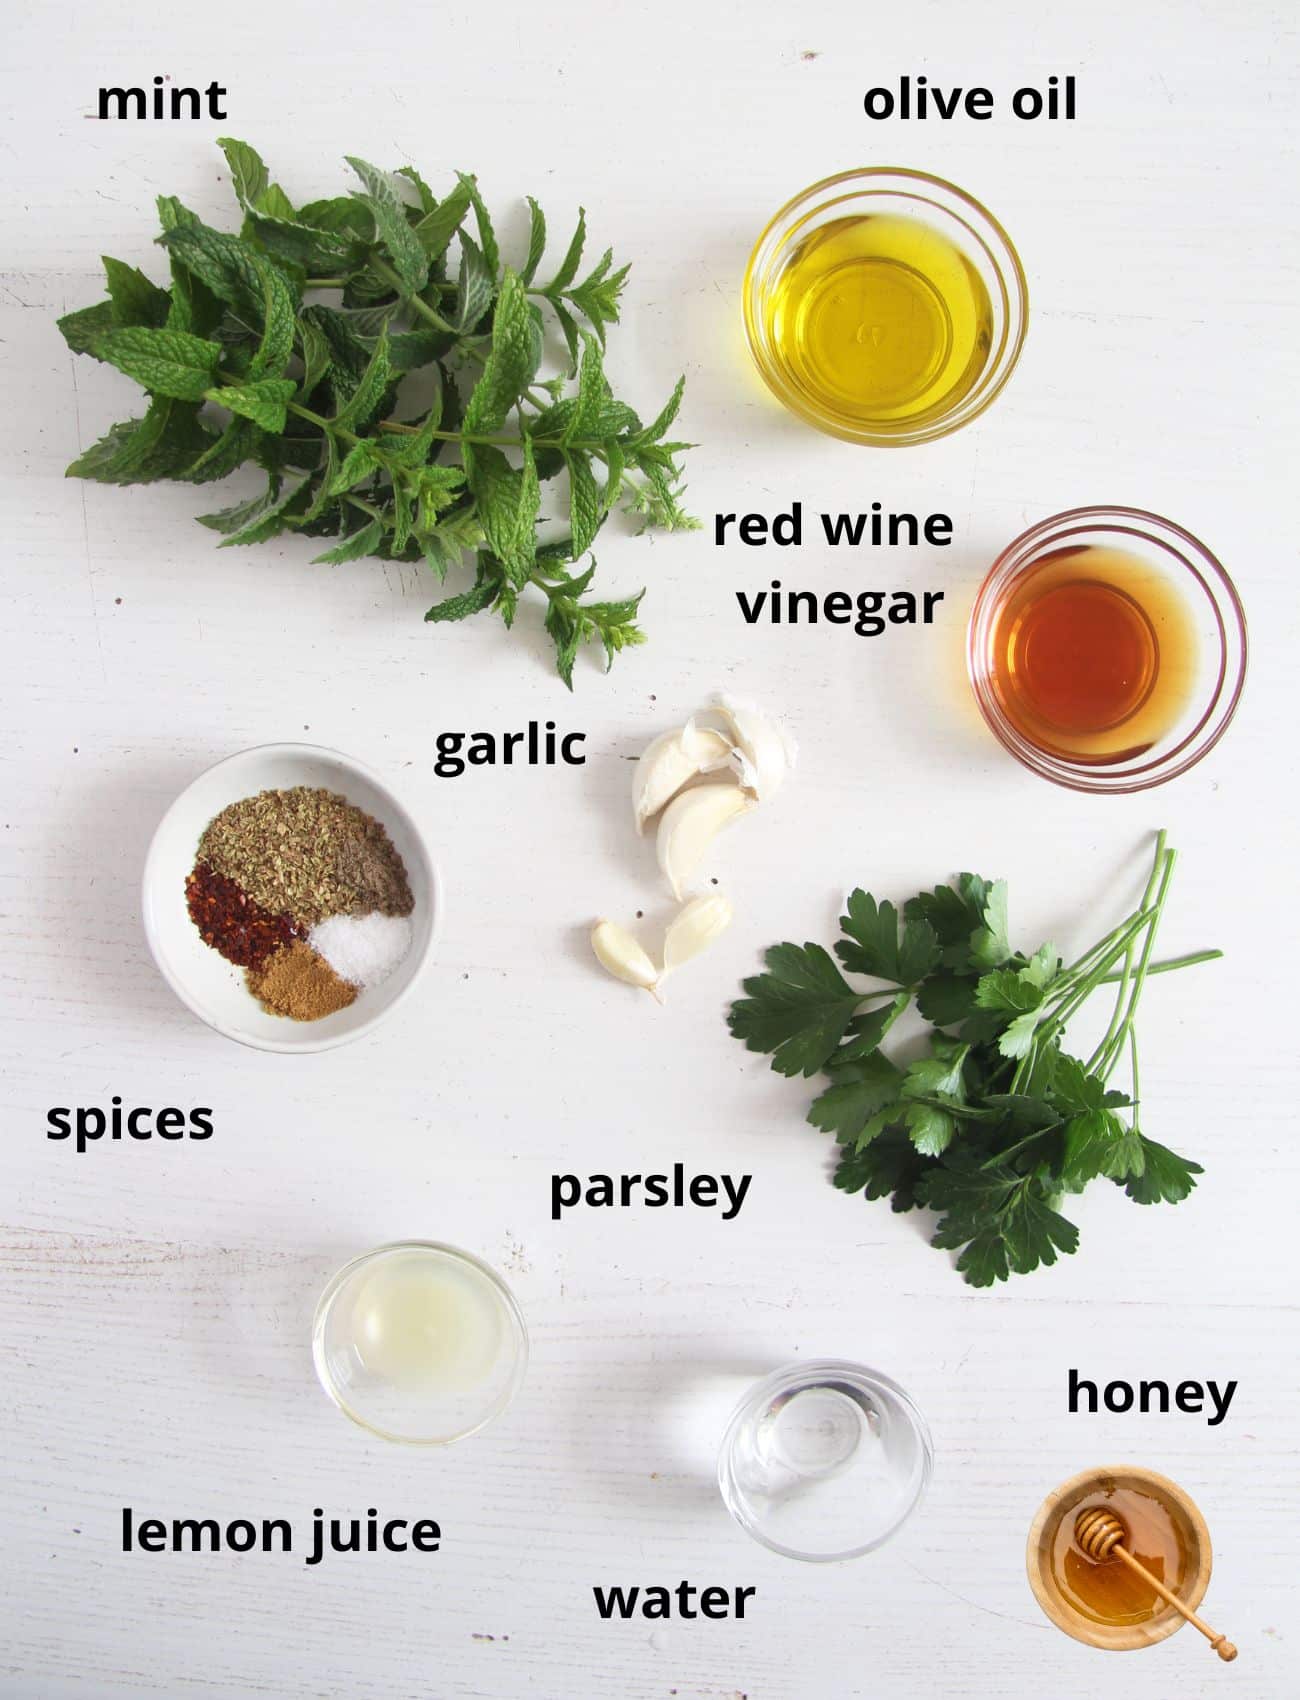 listed ingredients for making chimichurri with parsley and mint on the table.